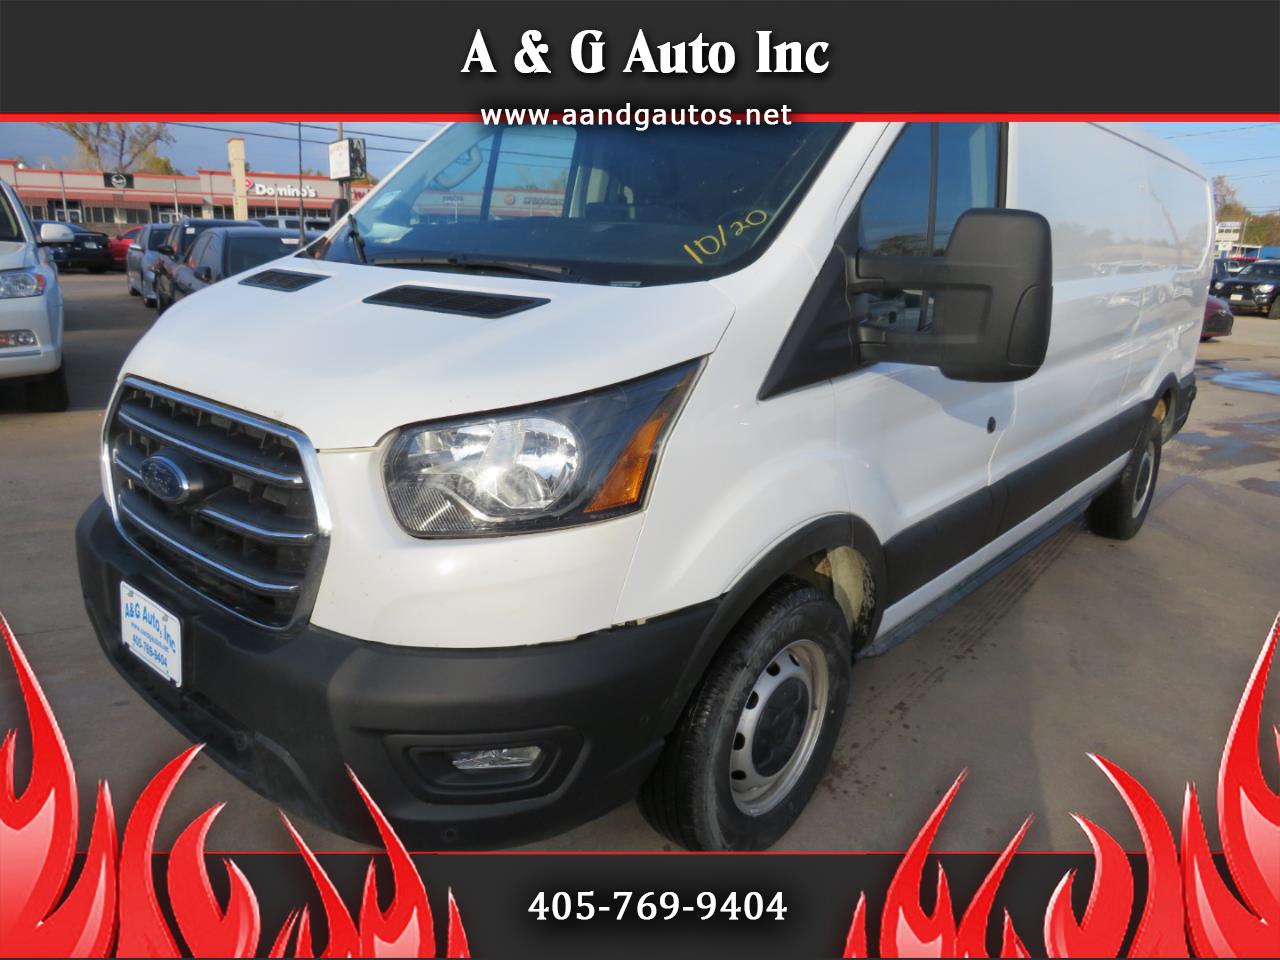 2020 RAM Promaster for sale in Oklahoma City OK 73141 by A & G Auto Inc